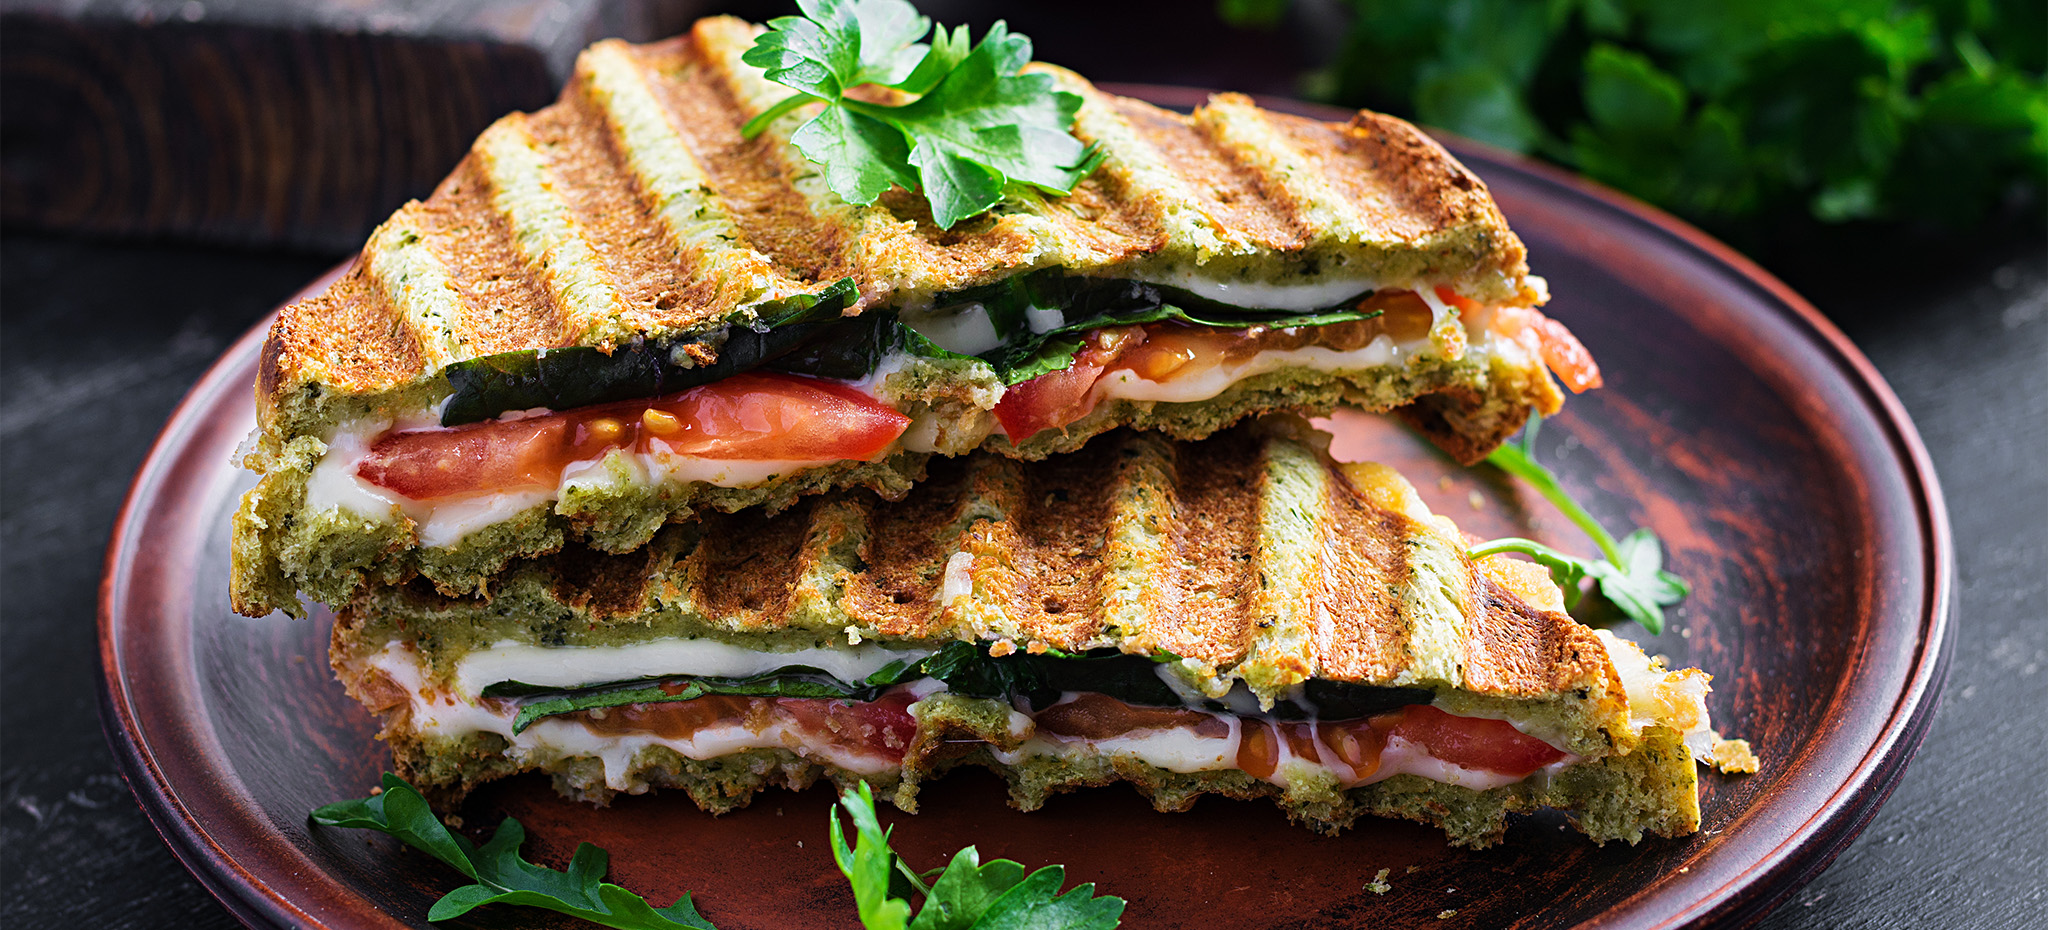 Paninis are among the favorites, the right warming gives that perfect combination of melting and and bread crunhiness.